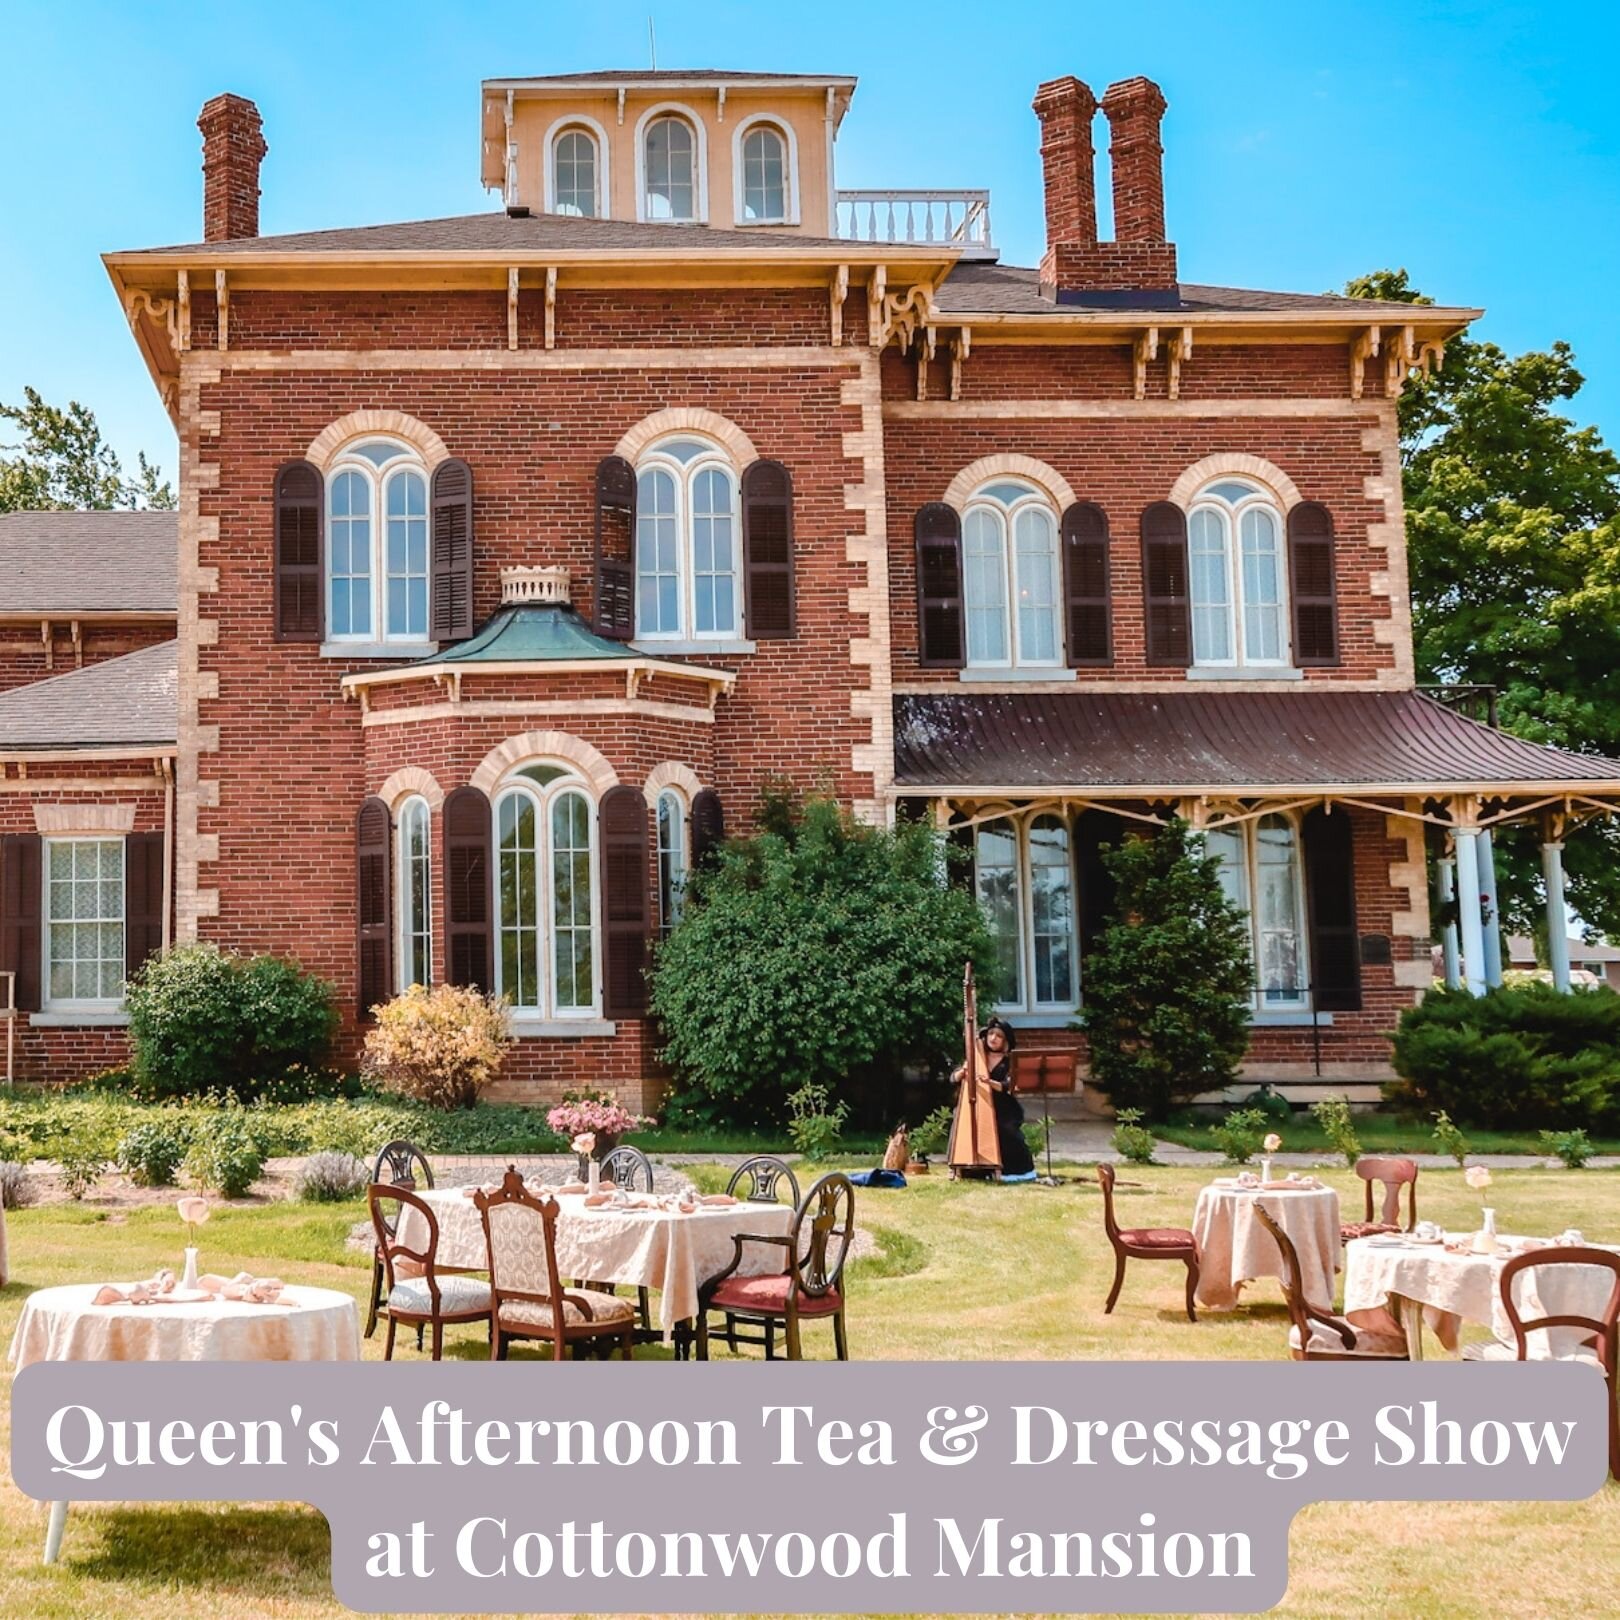 June 10th, 2023
Celebrate the life of Her Majesty Queen Elizabeth II at this exciting new event, Cottonwood Mansion's Queen's Commemorative Afternoon Tea. Enjoy an exciting dressage show on the grounds in honour of the Queen's love for horses, explor